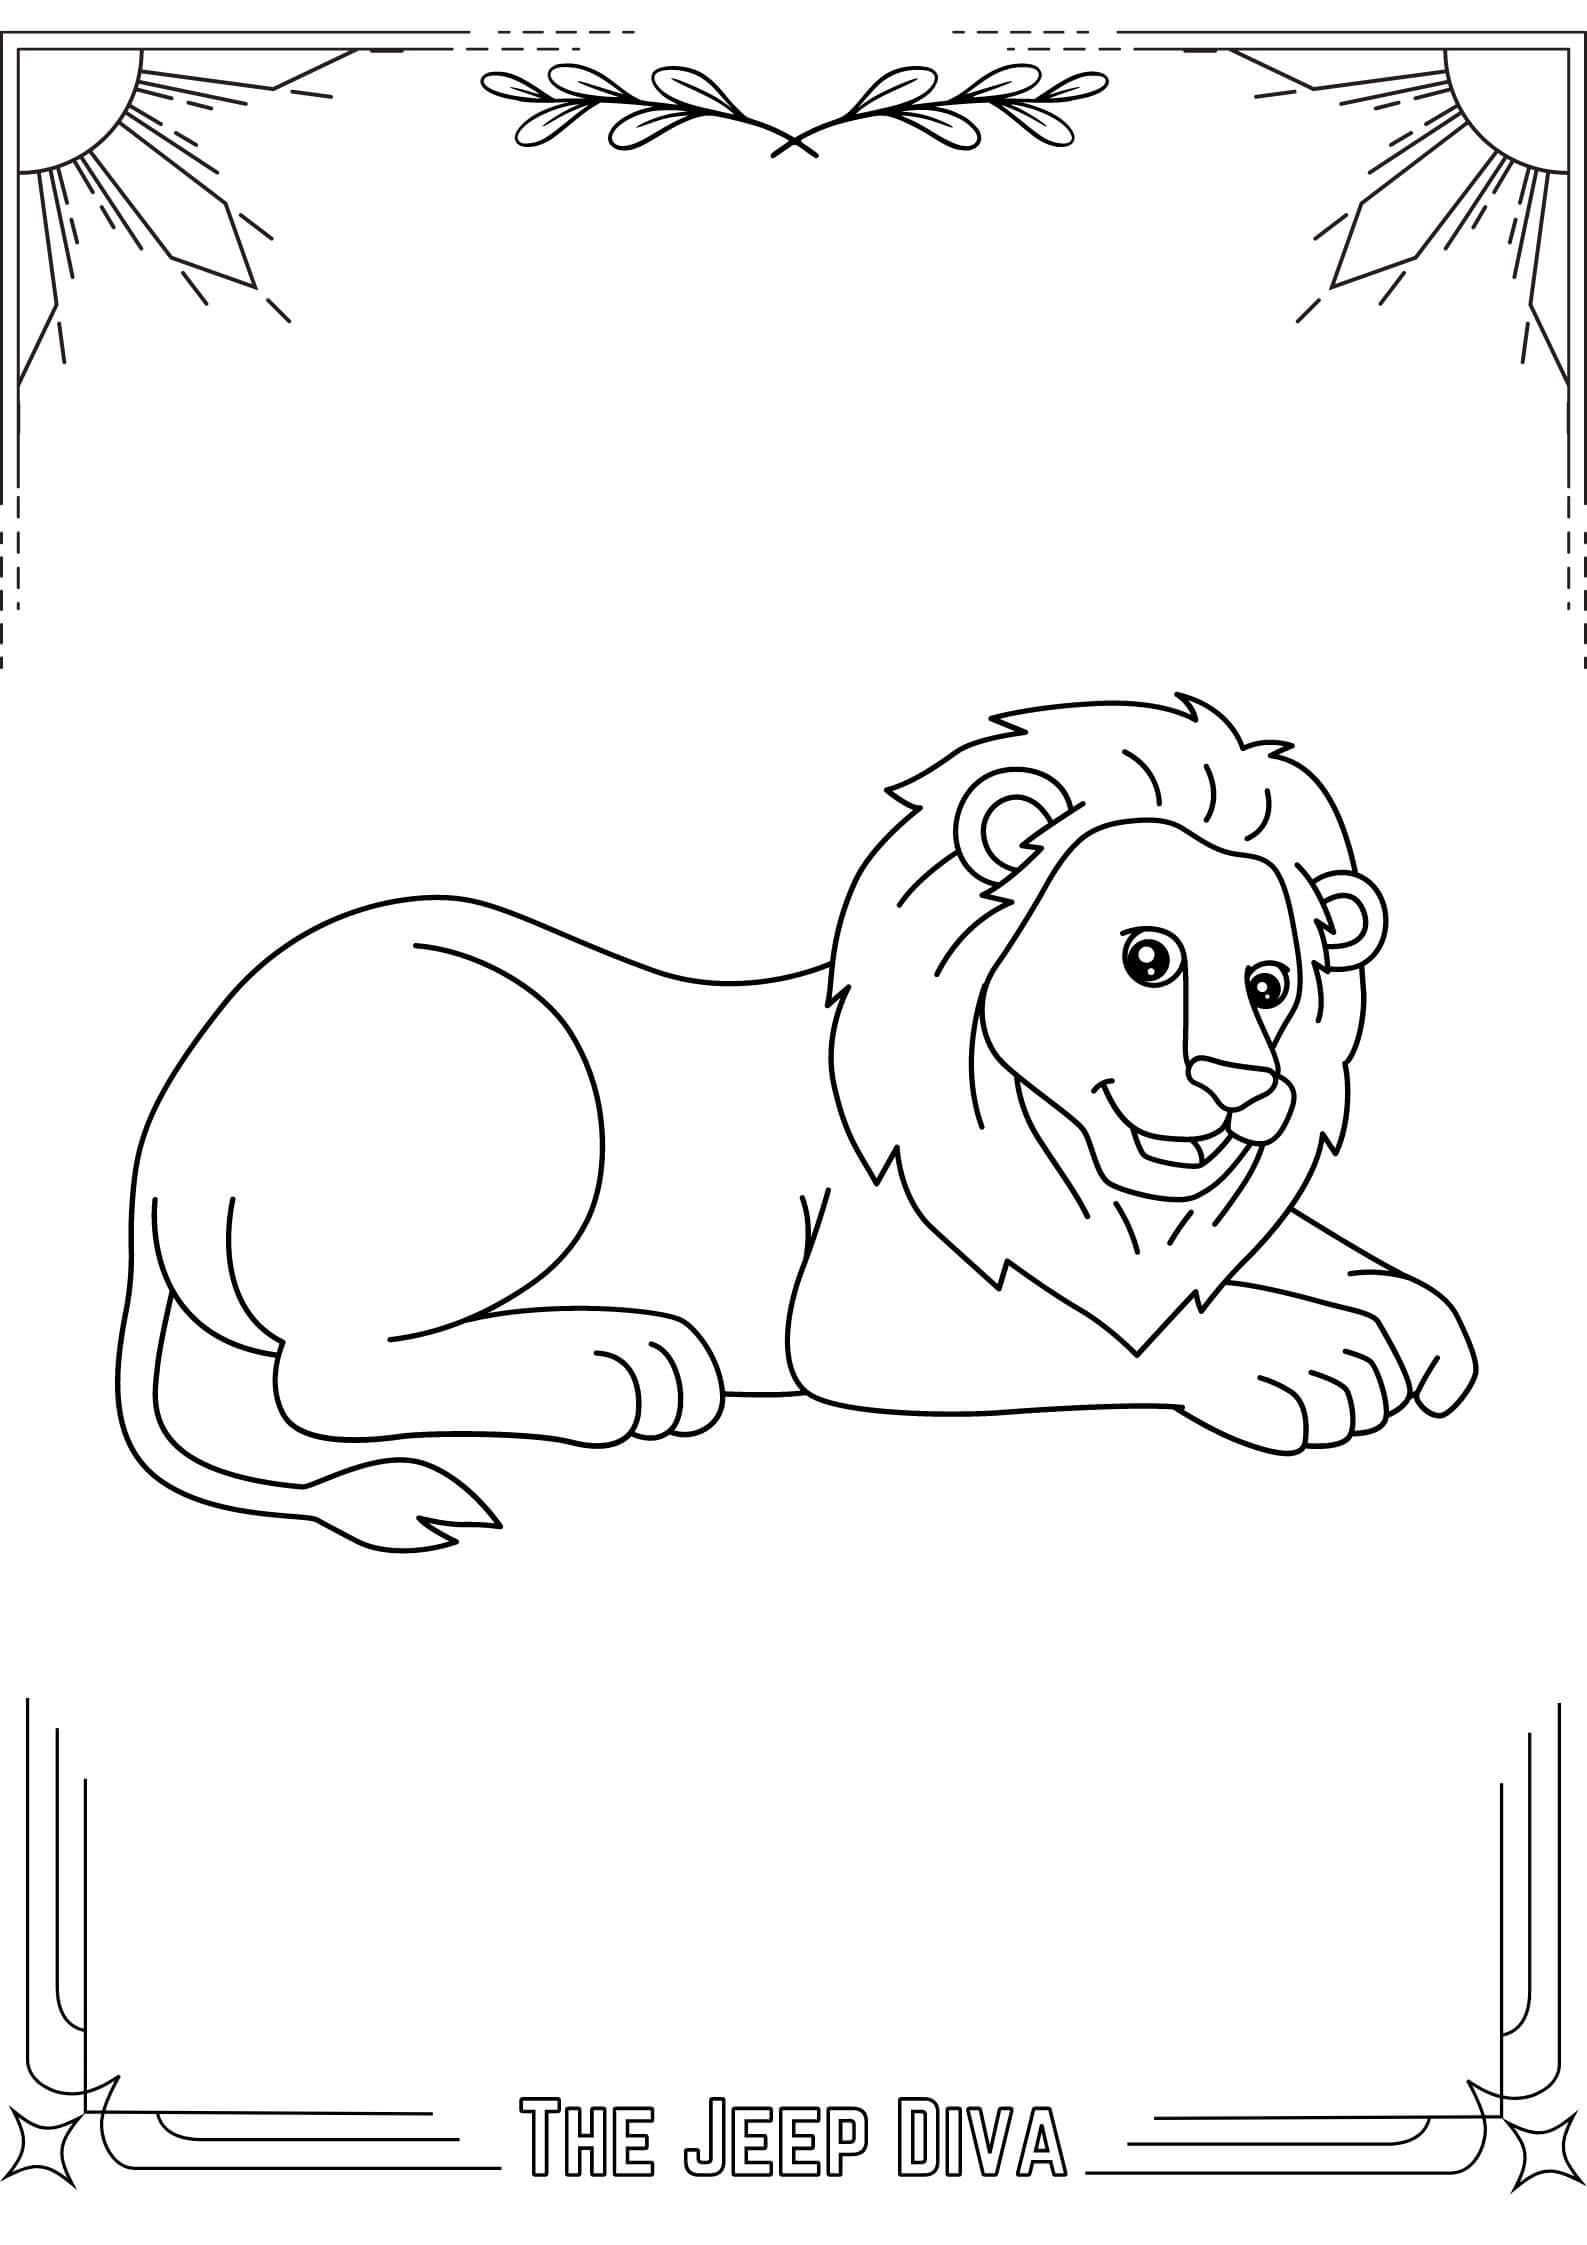 The Jeep Diva Coloring Page 8 Lion